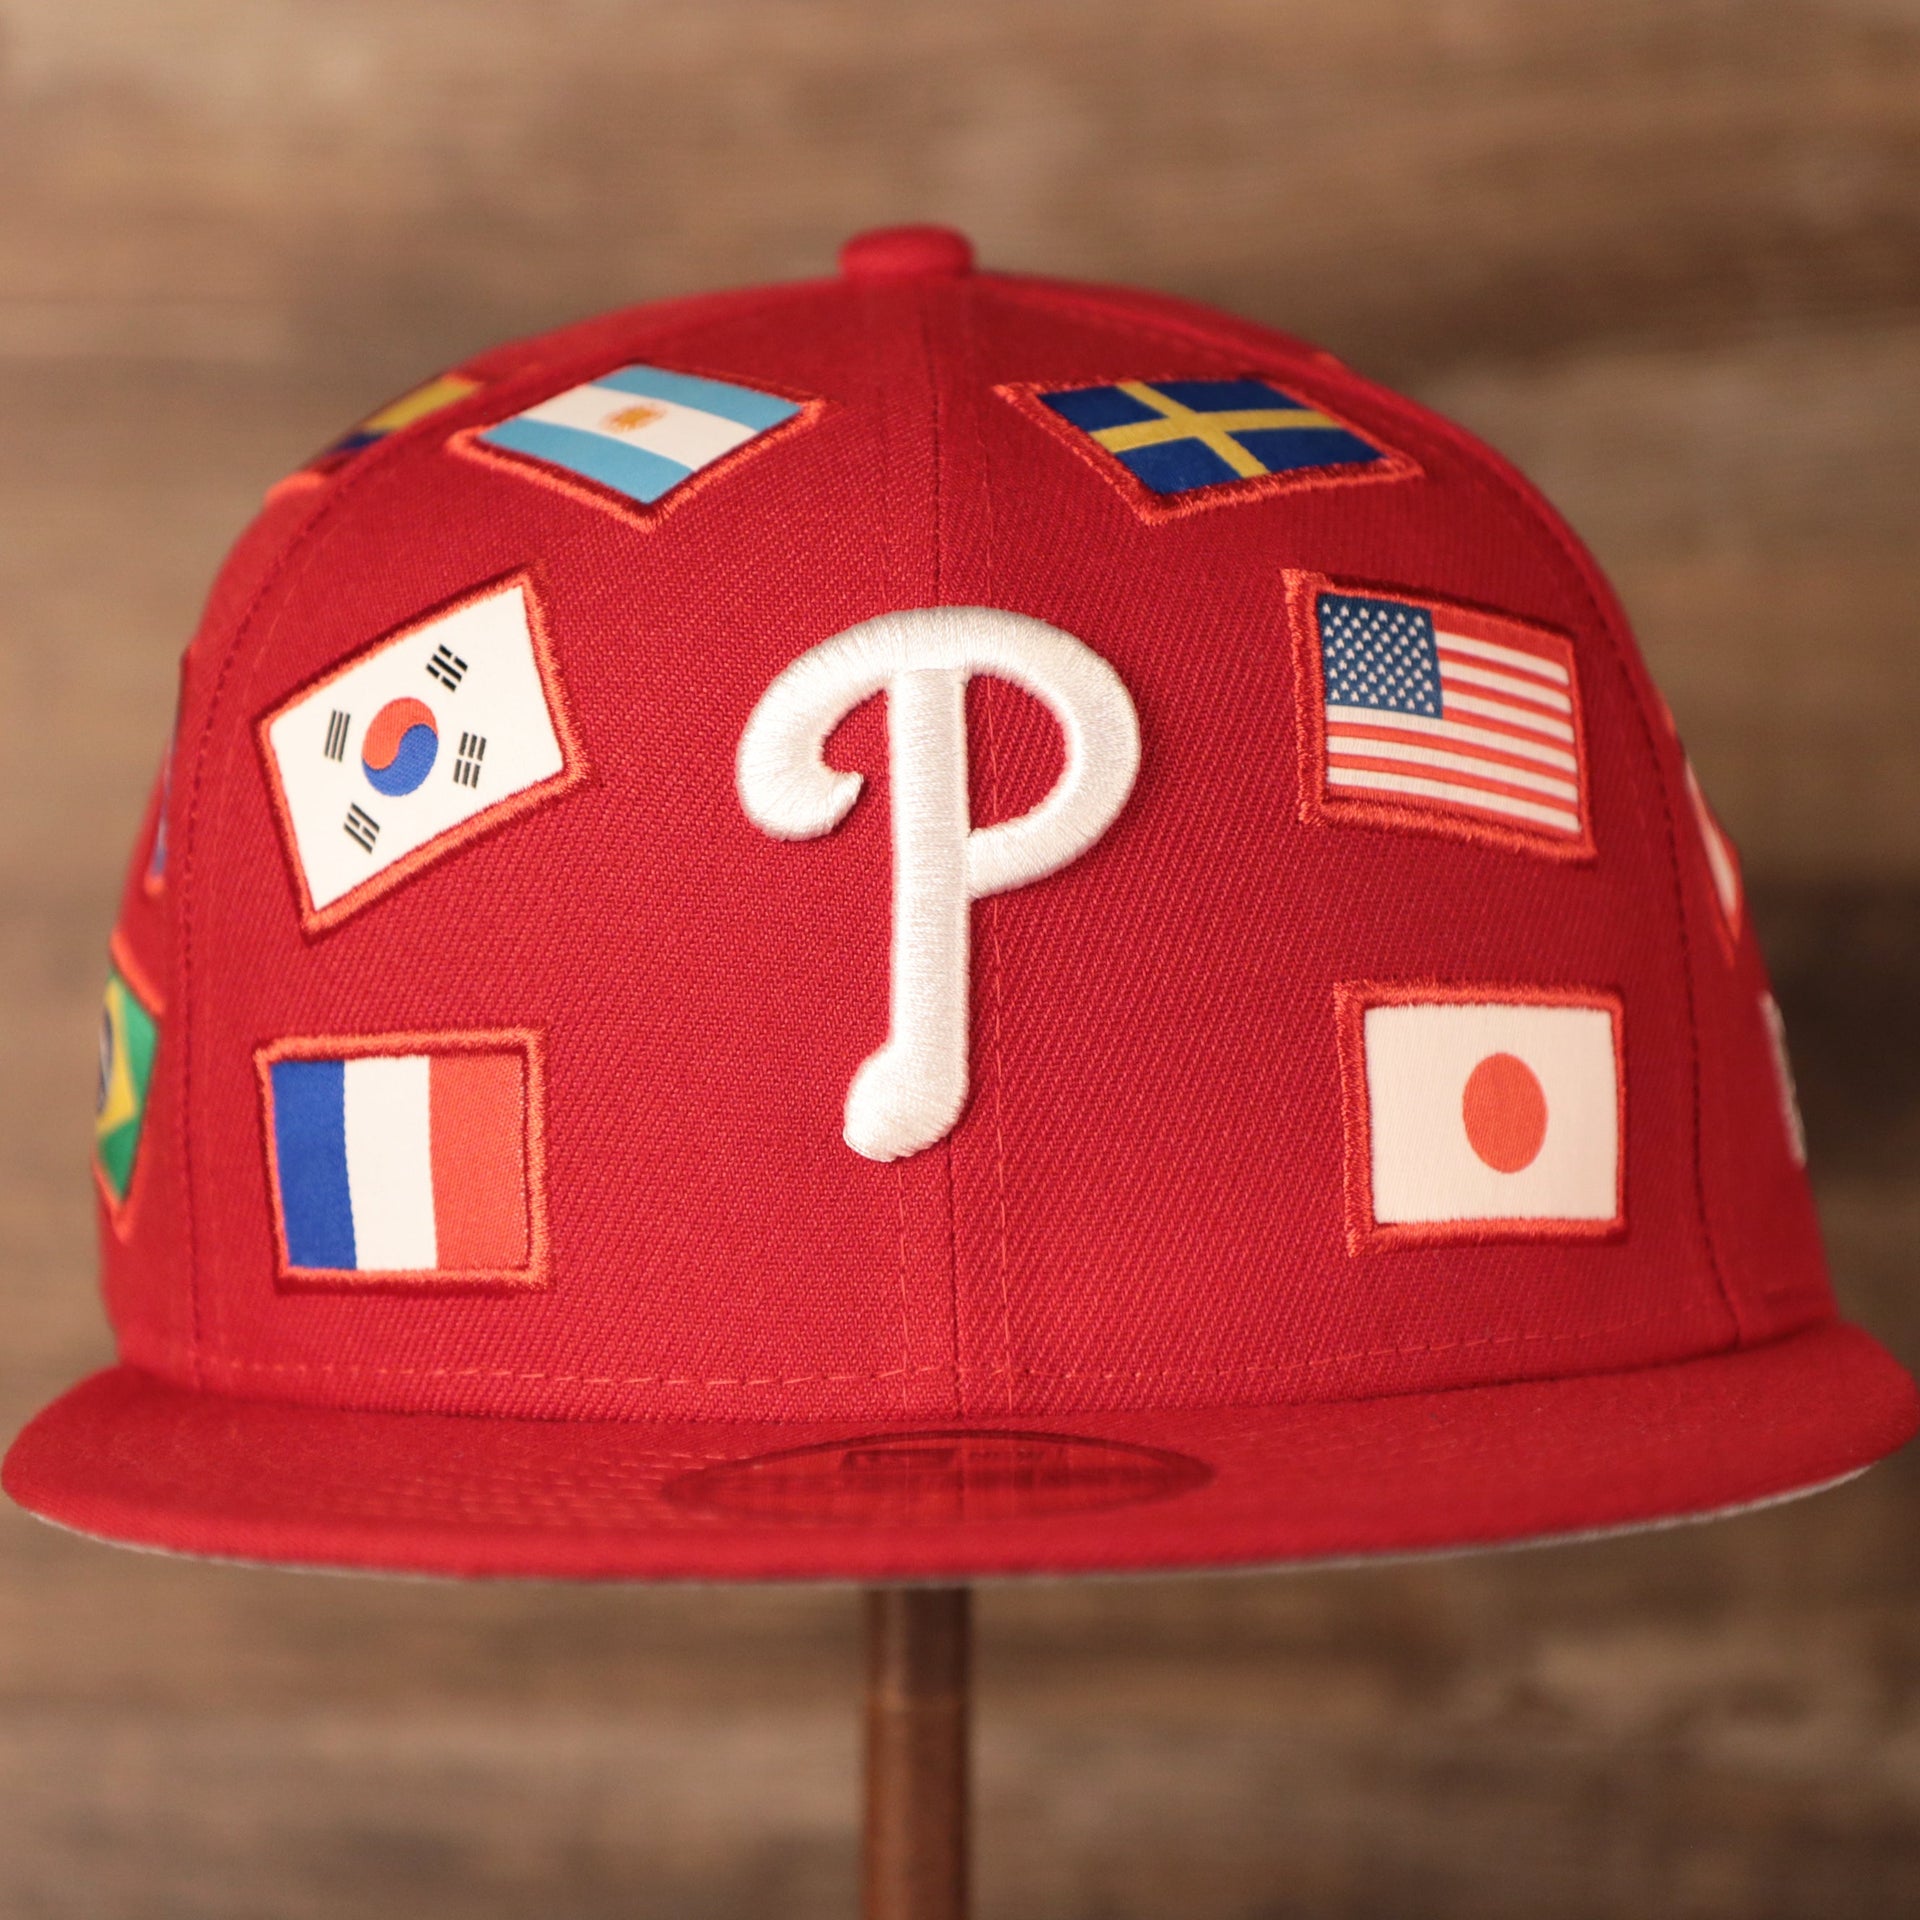 Phillies World Flags Gray Bottom Fitted Cap | Philadelphia Phillies International Flags Red Grey Under Brim Fitted Cap the front of this philies cap has flags from the countries of America, Japan, and France 